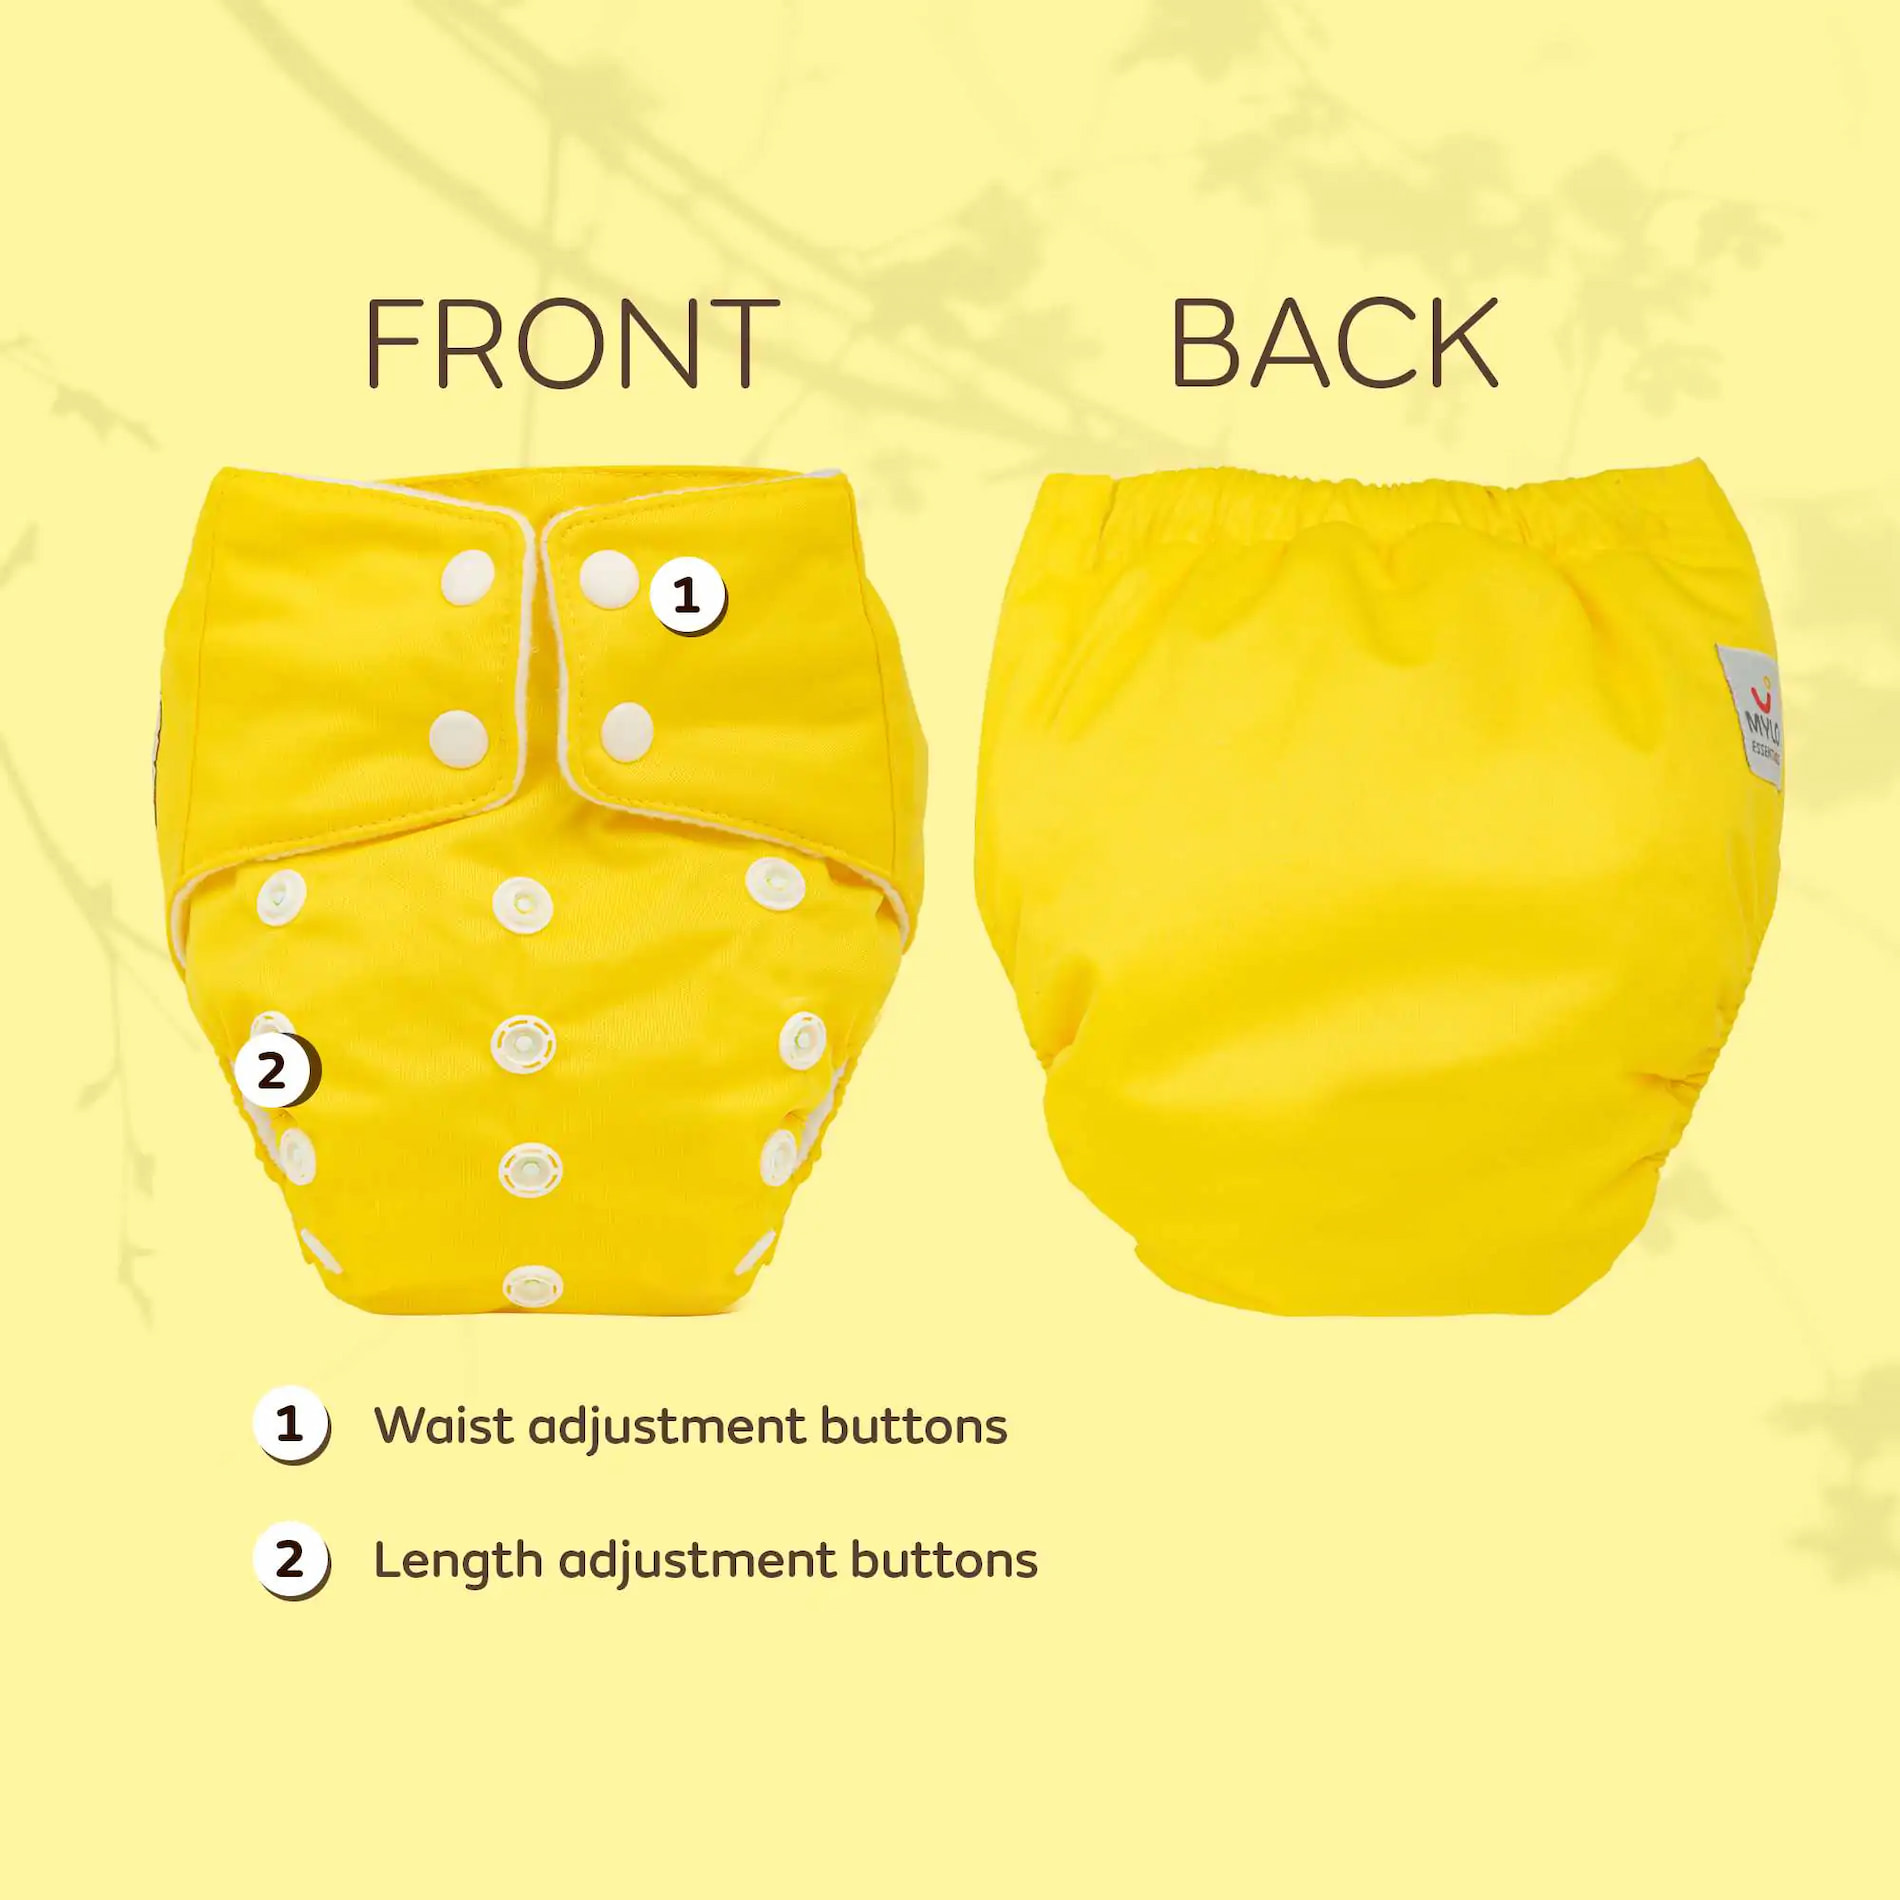 Adjustable Washable & Reusable Cloth Diaper With Dry Feel, Absorbent Insert Pad (3M-3Y) | Oeko-Tex Certified | Prevents Rashes - Yellow, Green & Blue - Pack of 3